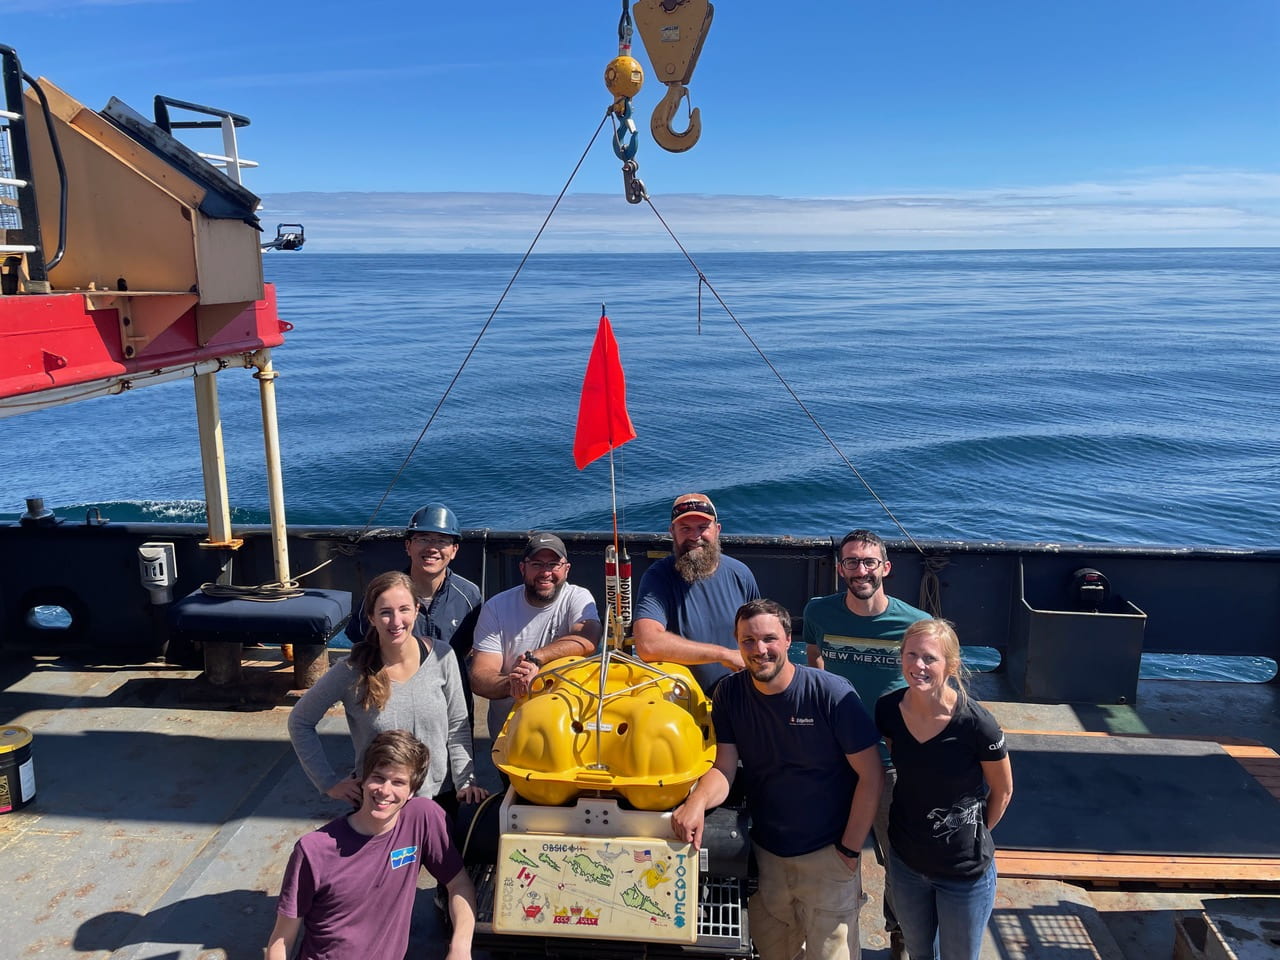 Science Party aboard The CCGS Tully Deploying and Recovering OBS on the Queen Charlotte Fault